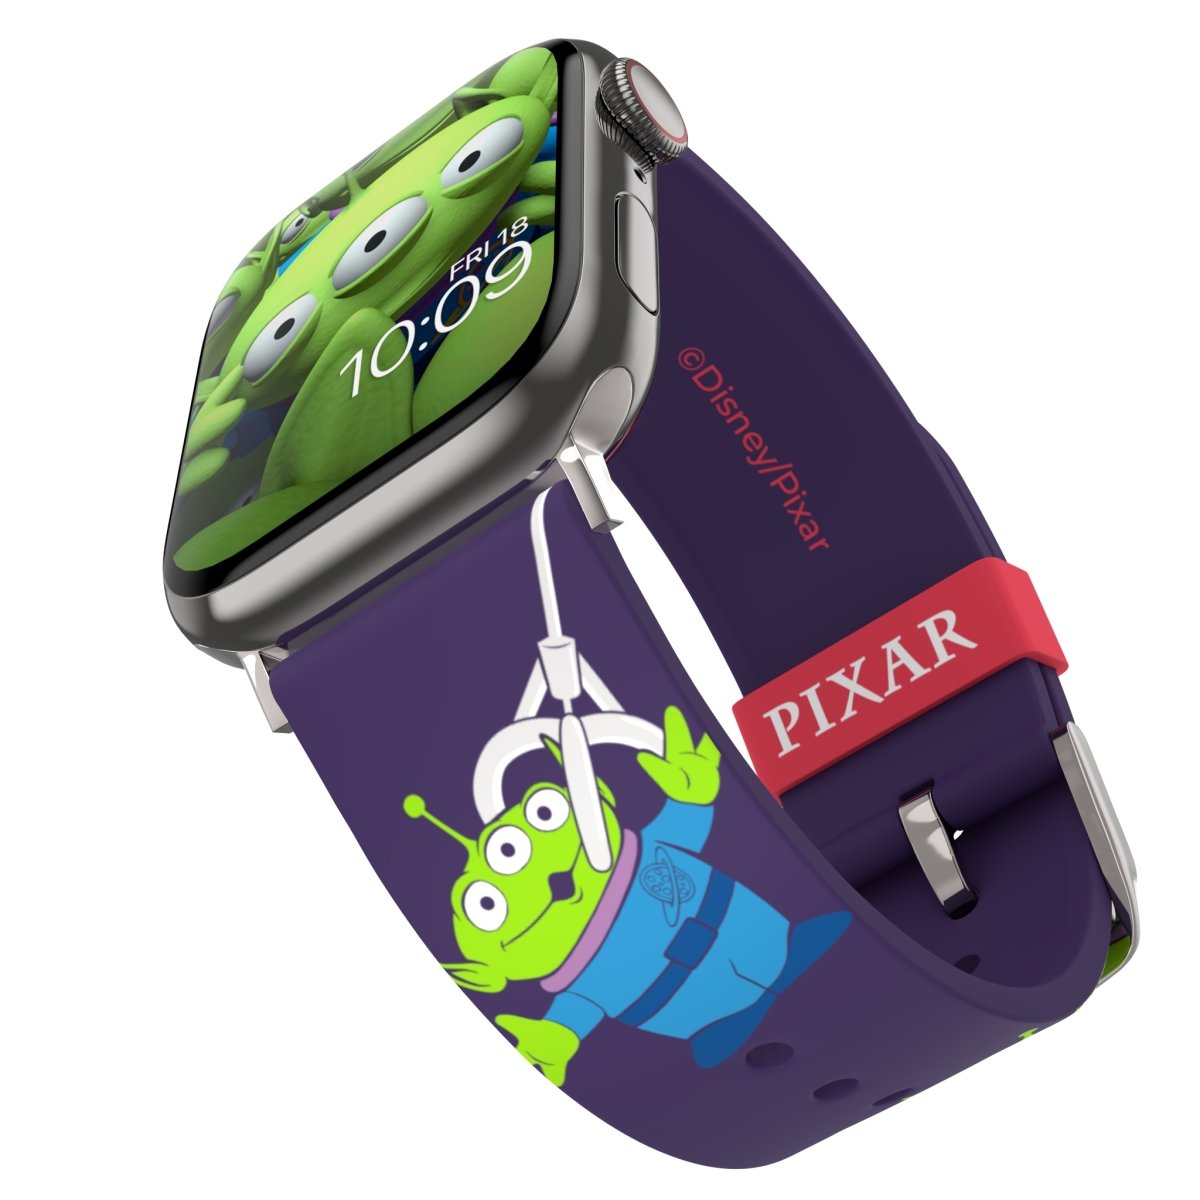 Toy Story - Aliens Smartwatch Band by MobyFox